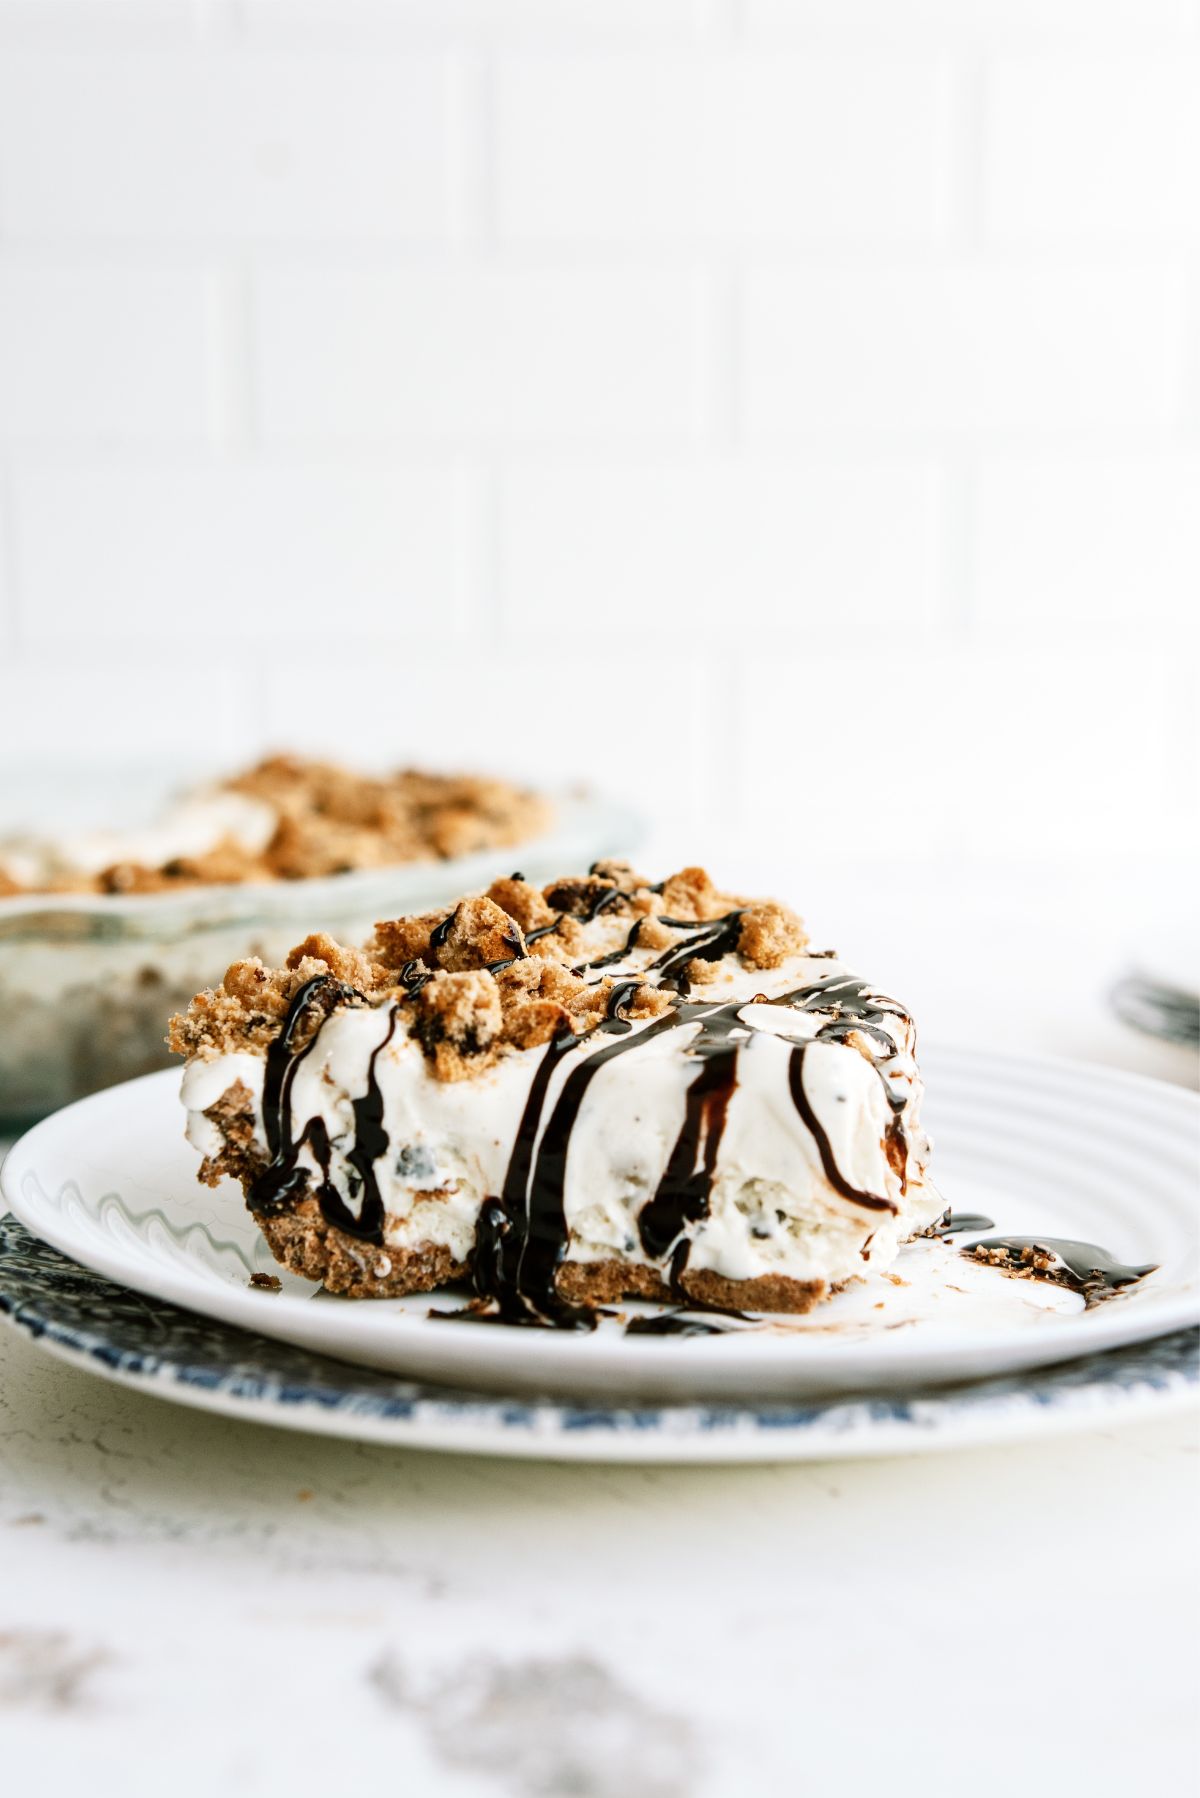 Slice of Chocolate Chip Cookie Ice Cream Pie on a plate